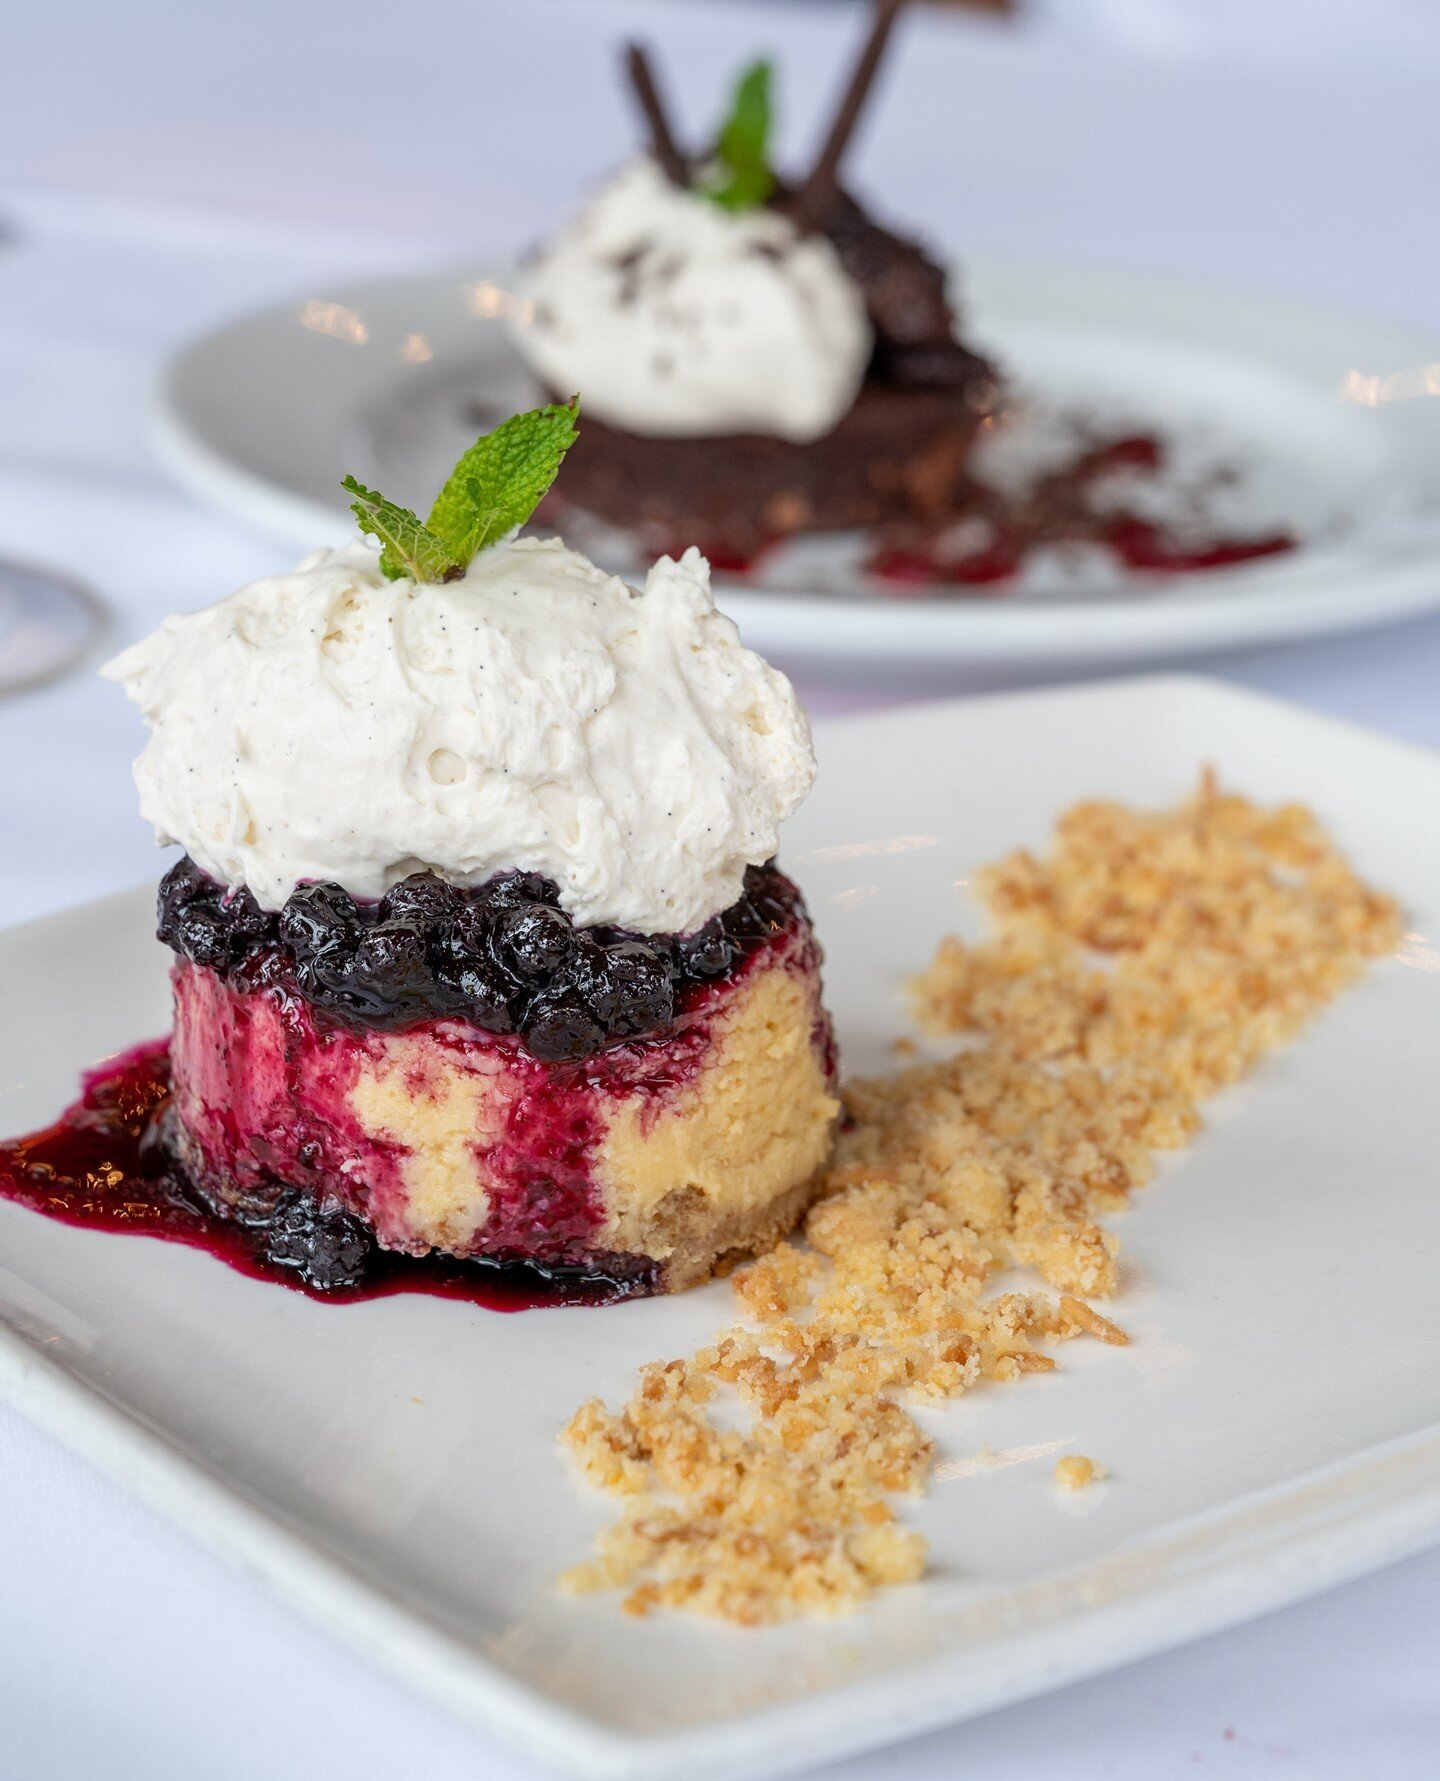 Did someone say dessert!? 😋⁠
⁠
Finish off your 3 Course Restaurant Week meal with our�Cheesecake or Chocolate Flourless Cake!⁠
⁠
#seafood #seafoodporn #seafoodlover #seafoodlove #seafoodlovers #seafoodtime #freshseafood #seafoodresturant #seafoodie 